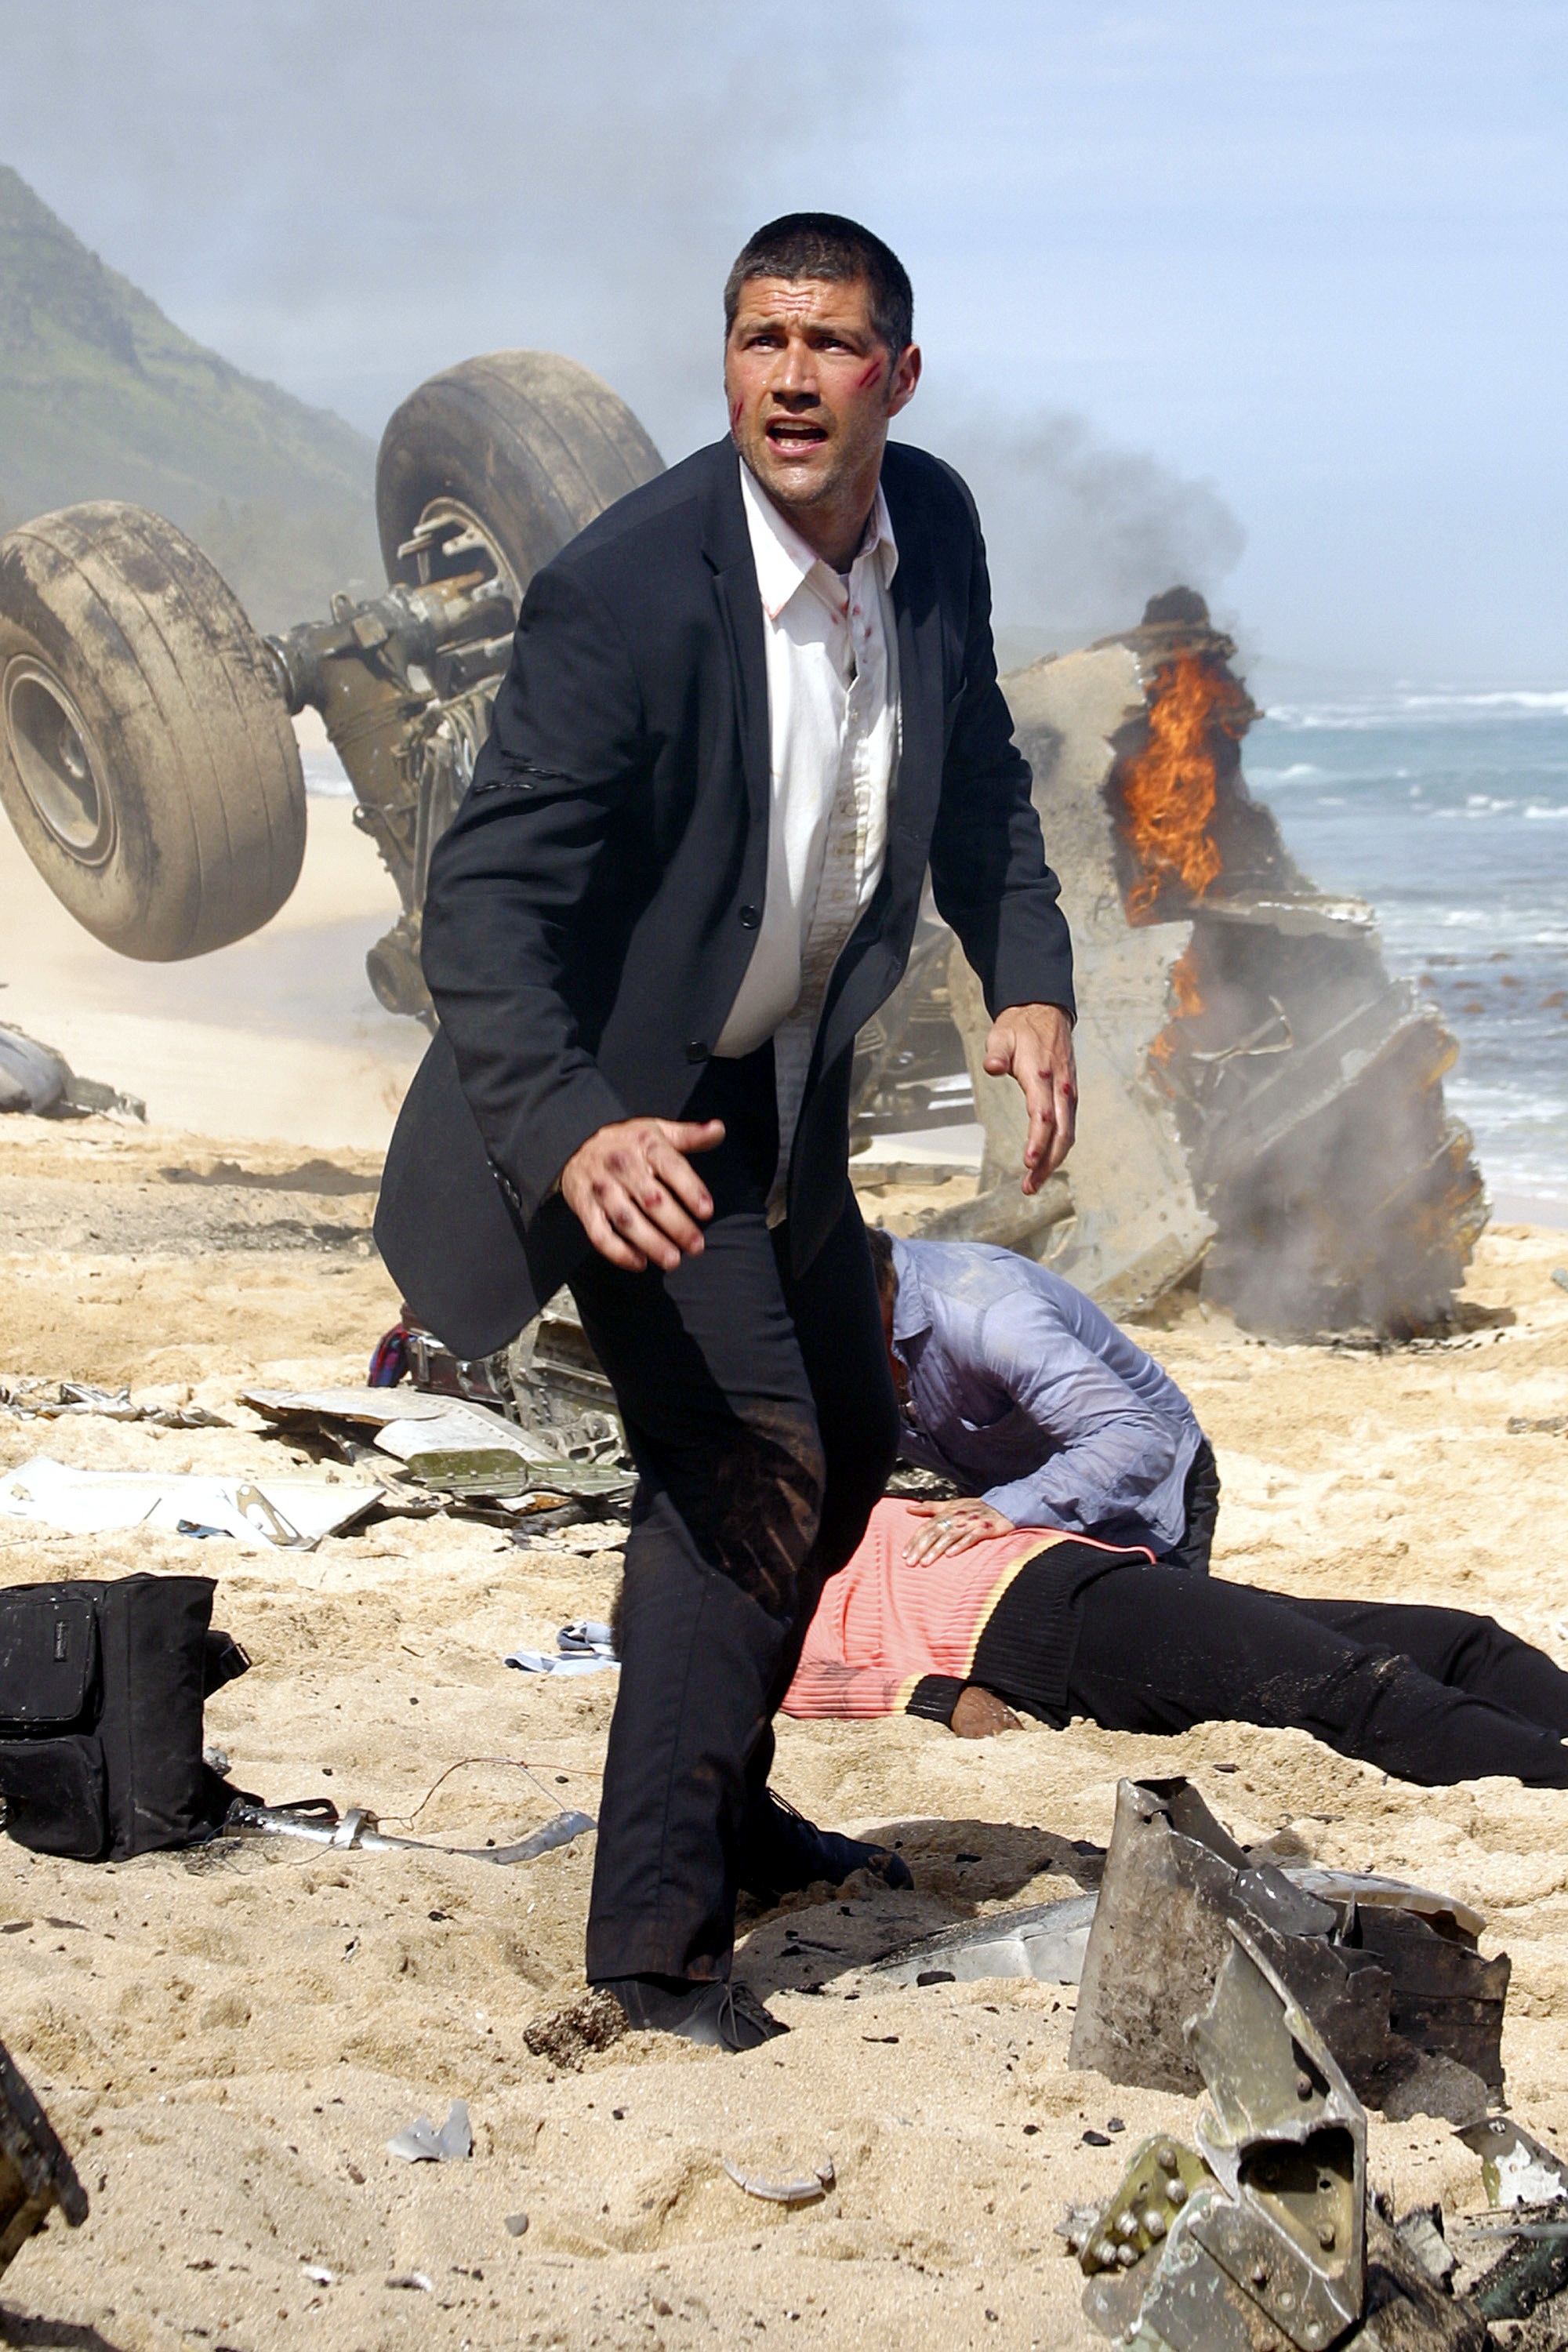 A man in a suit running from a fiery crash site with a large tire and debris around